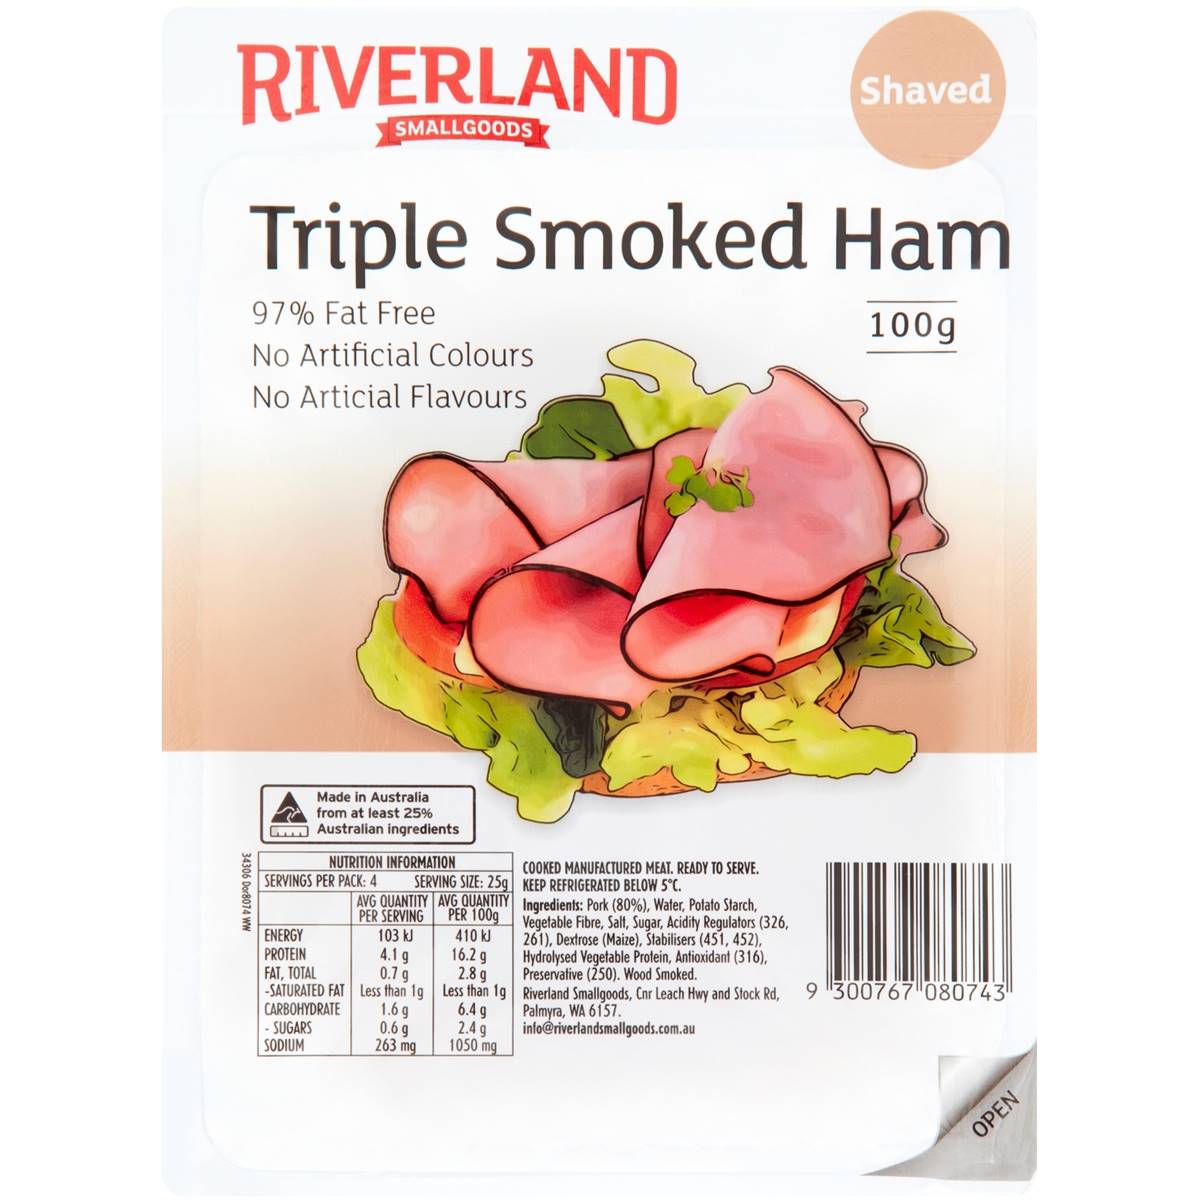 Calories in Riverland Triple Smoked Ham Shaved